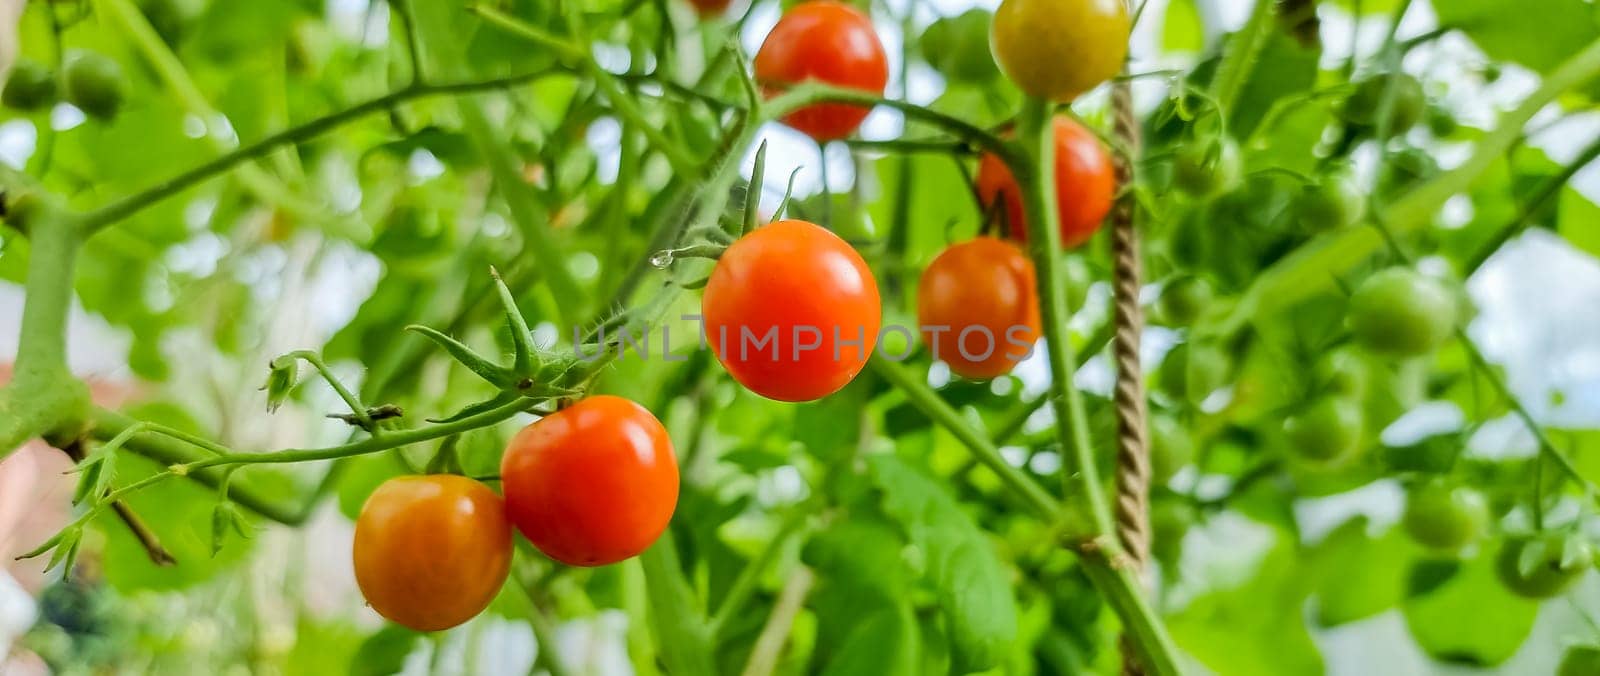 Ripe tomatoes growing on the branches - cultivated in the garden